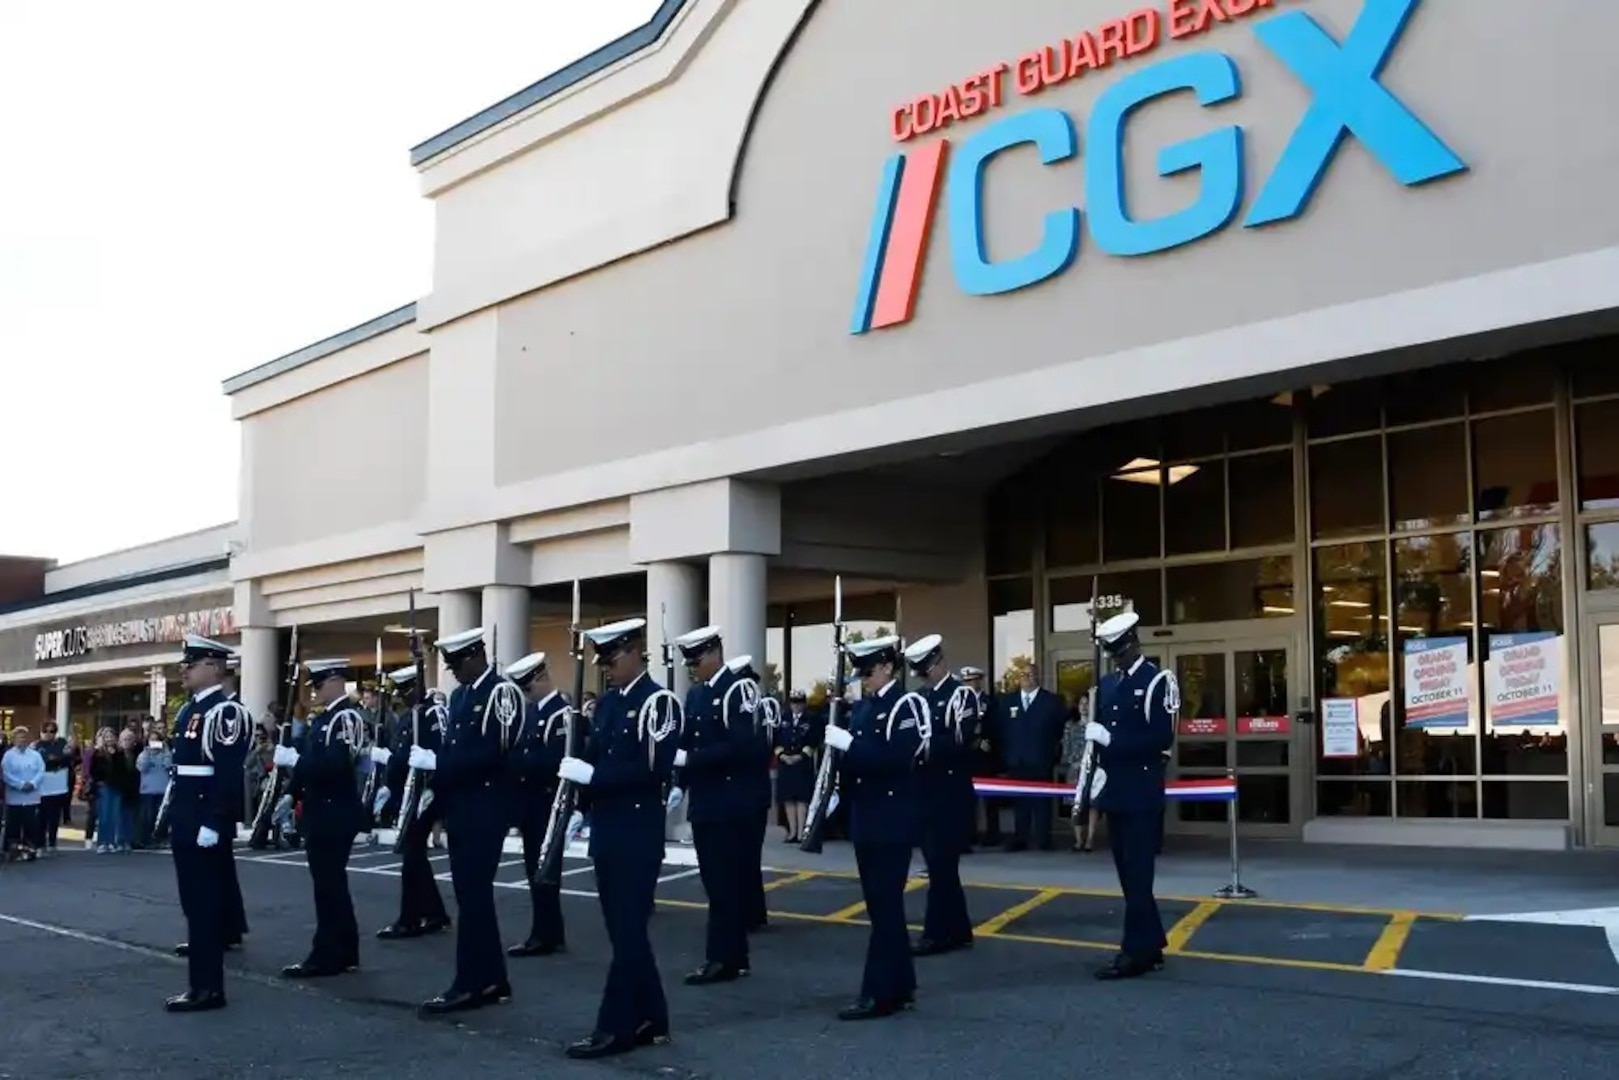 The Coast Guard Silent Drill Team participates in the Grand opening of the Centerville, Va., Coast Guard Exchange in Centerville, Friday, Oct. 11, 2019. The Coast Guard operates 64 exchanges throughout the continental United States, Alaska, Hawaii, and Puerto Rico. Proceeds support morale, well-being and recreation (MWR) activities through the world. Over the past 10 years Coast Guard exchanges have contributed more than $23 million to MWR programs. U.S. Coast Guard photo by Chief Petty Officer Chystalynn Kneen)